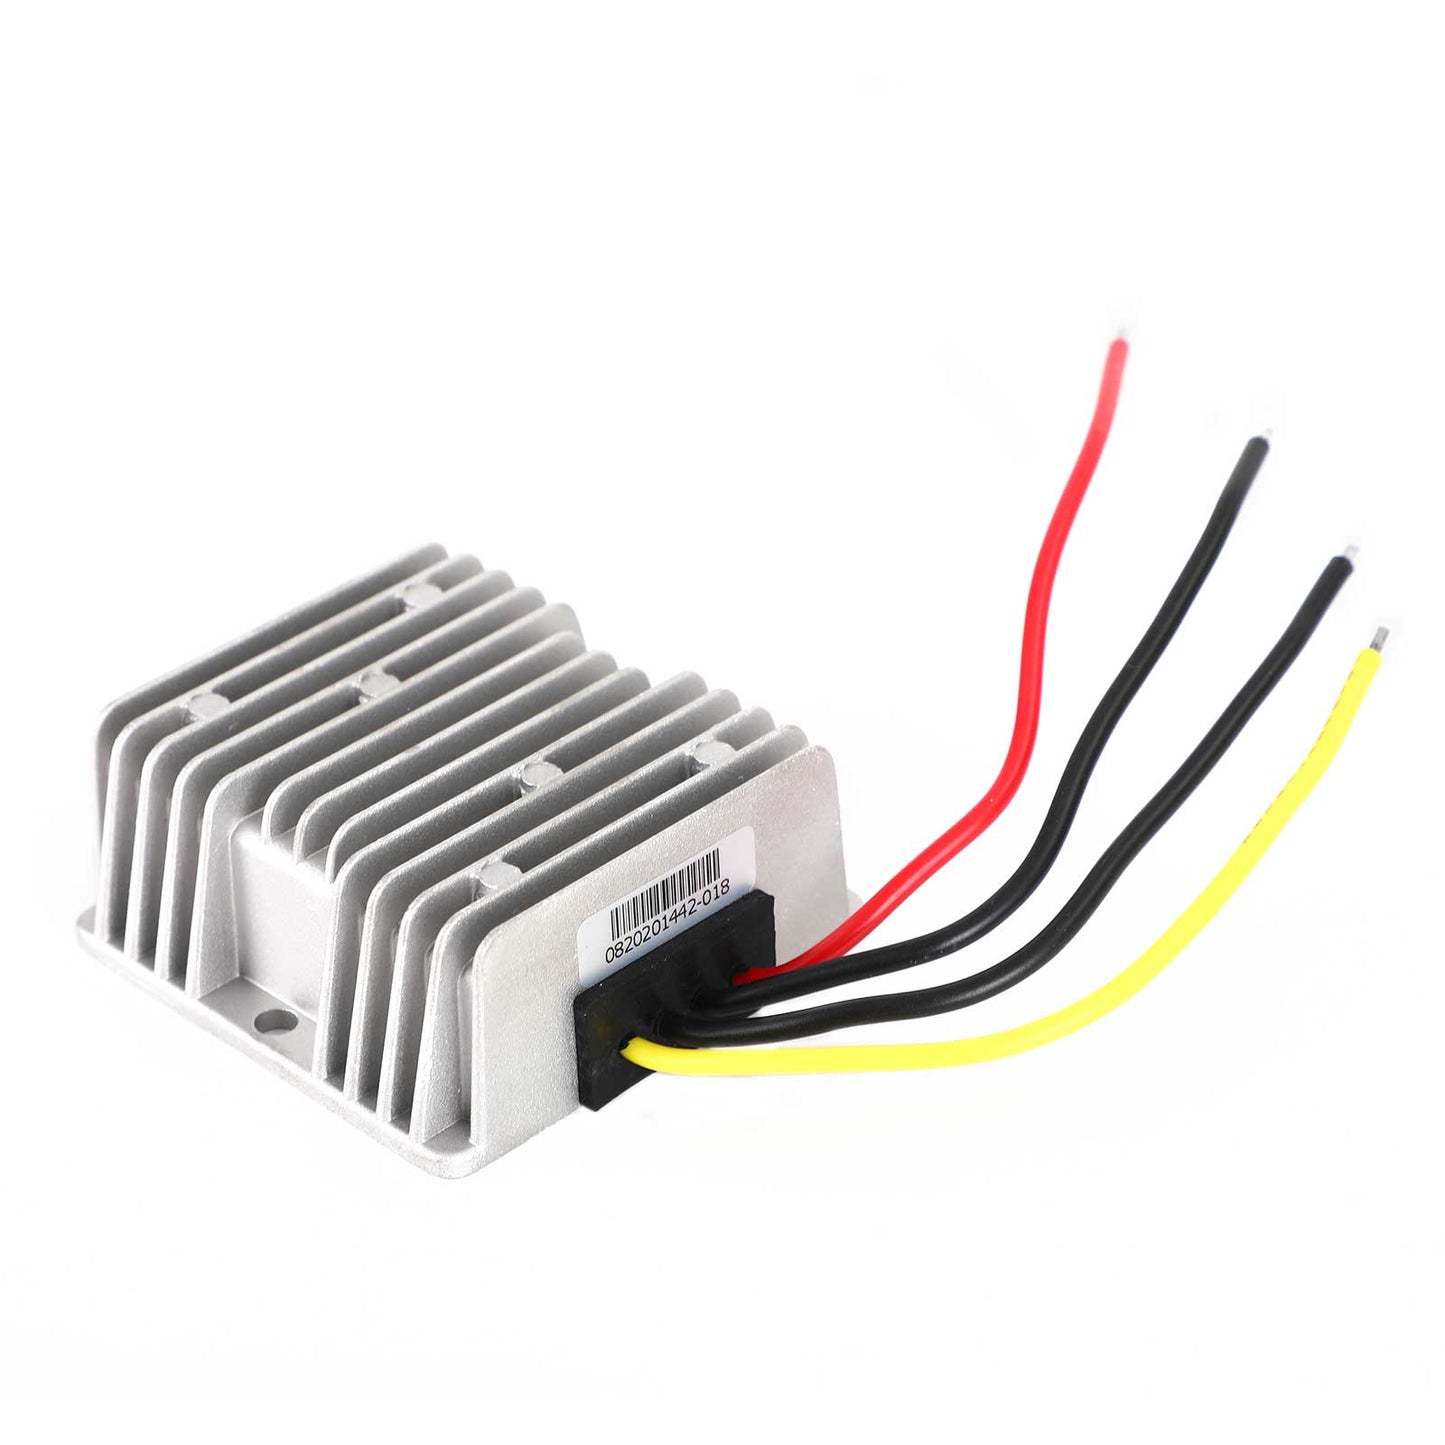 12V Auf 13.8V DC-DC Step Up Boost Spannungswandler 18A 248W Industrie-Netzteile